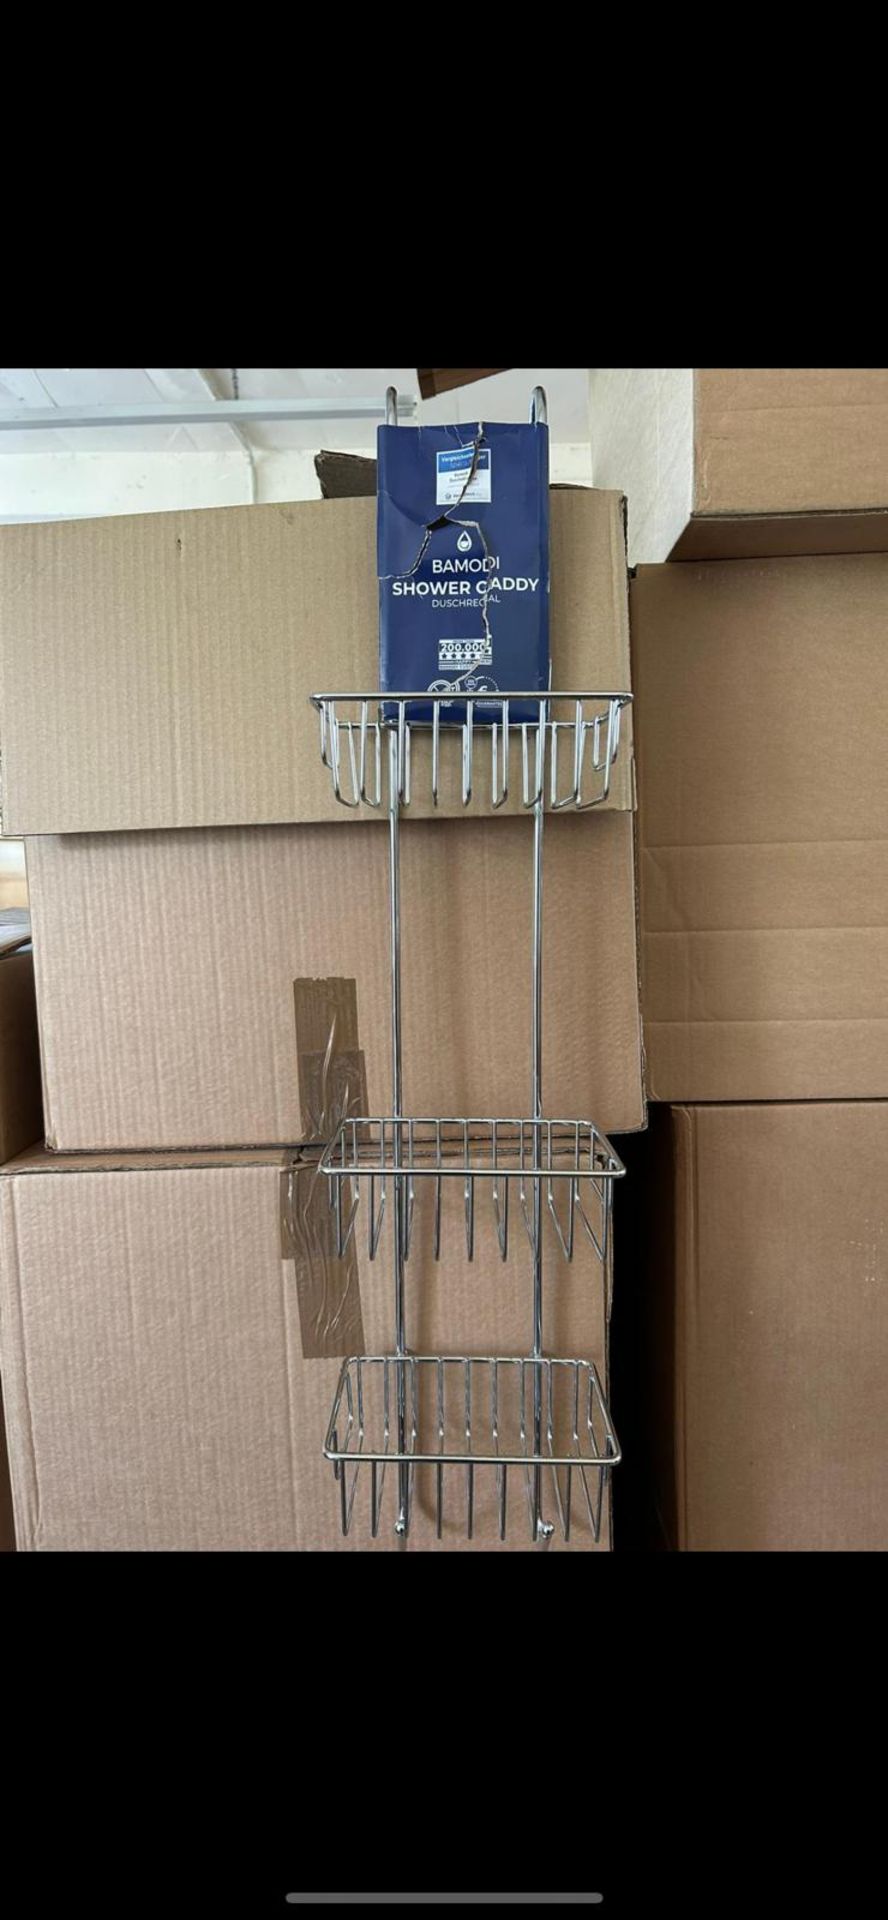 Bamodi Shower Caddy Hanging Stainless Steel 3 Shelf - (NEW) - RRP Â£50+! - Image 2 of 2